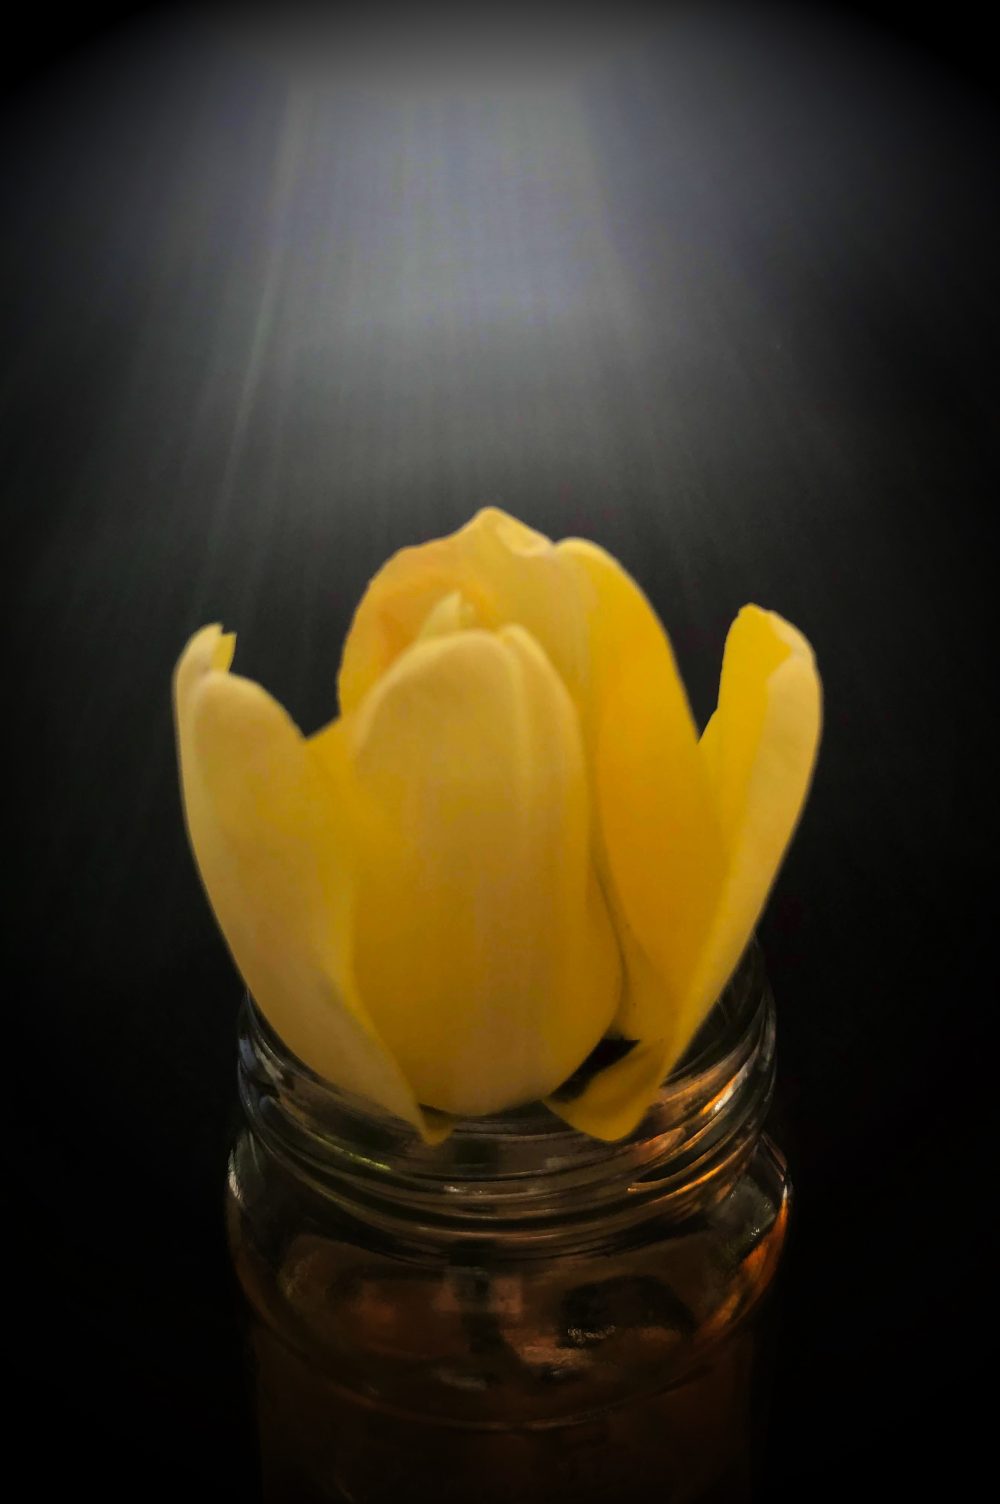 A tulip opening up to the bright sunlight entering into to the black dark environment of the tulip.